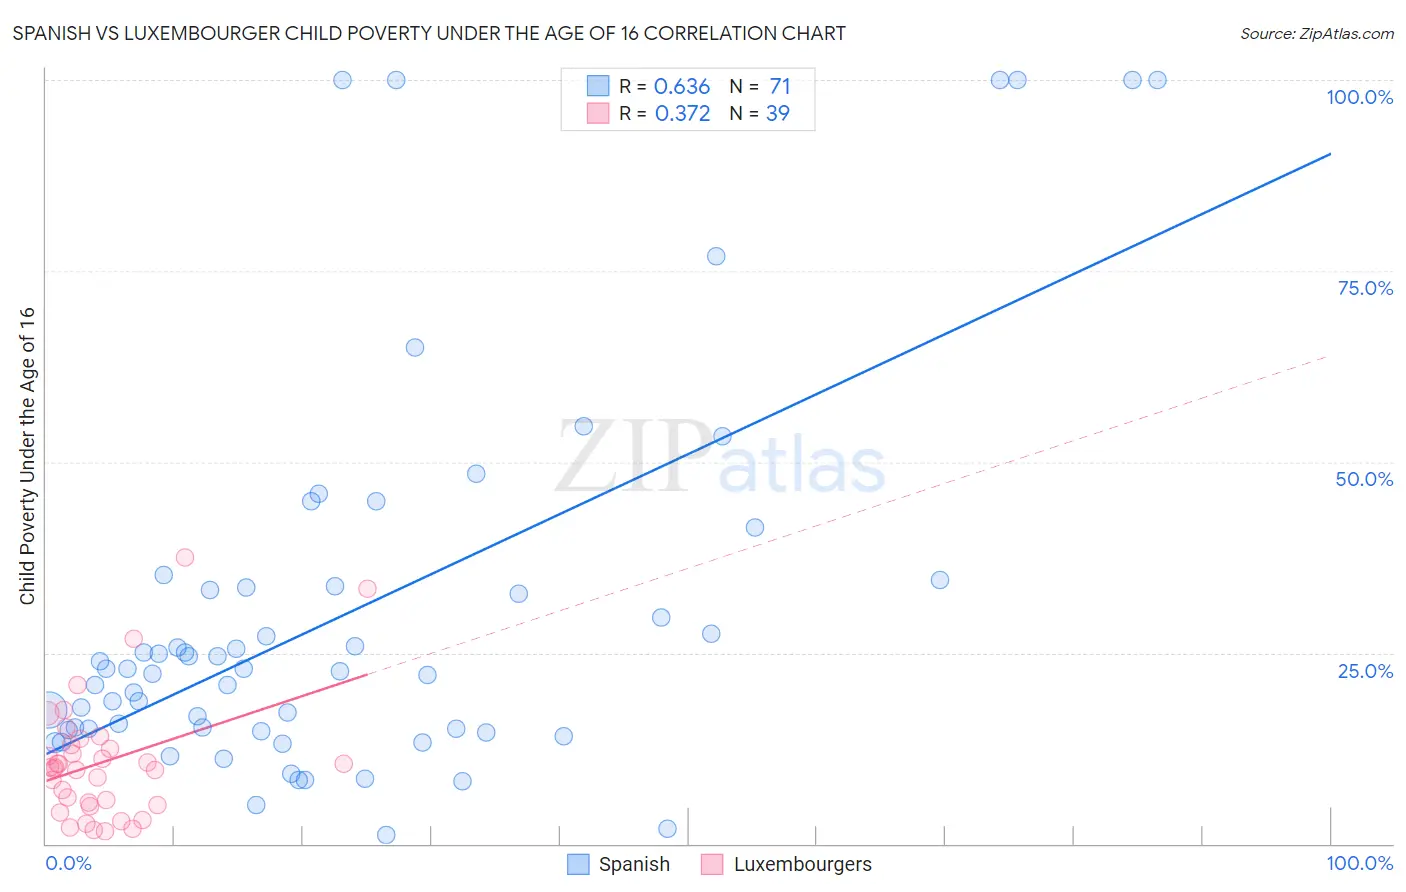 Spanish vs Luxembourger Child Poverty Under the Age of 16